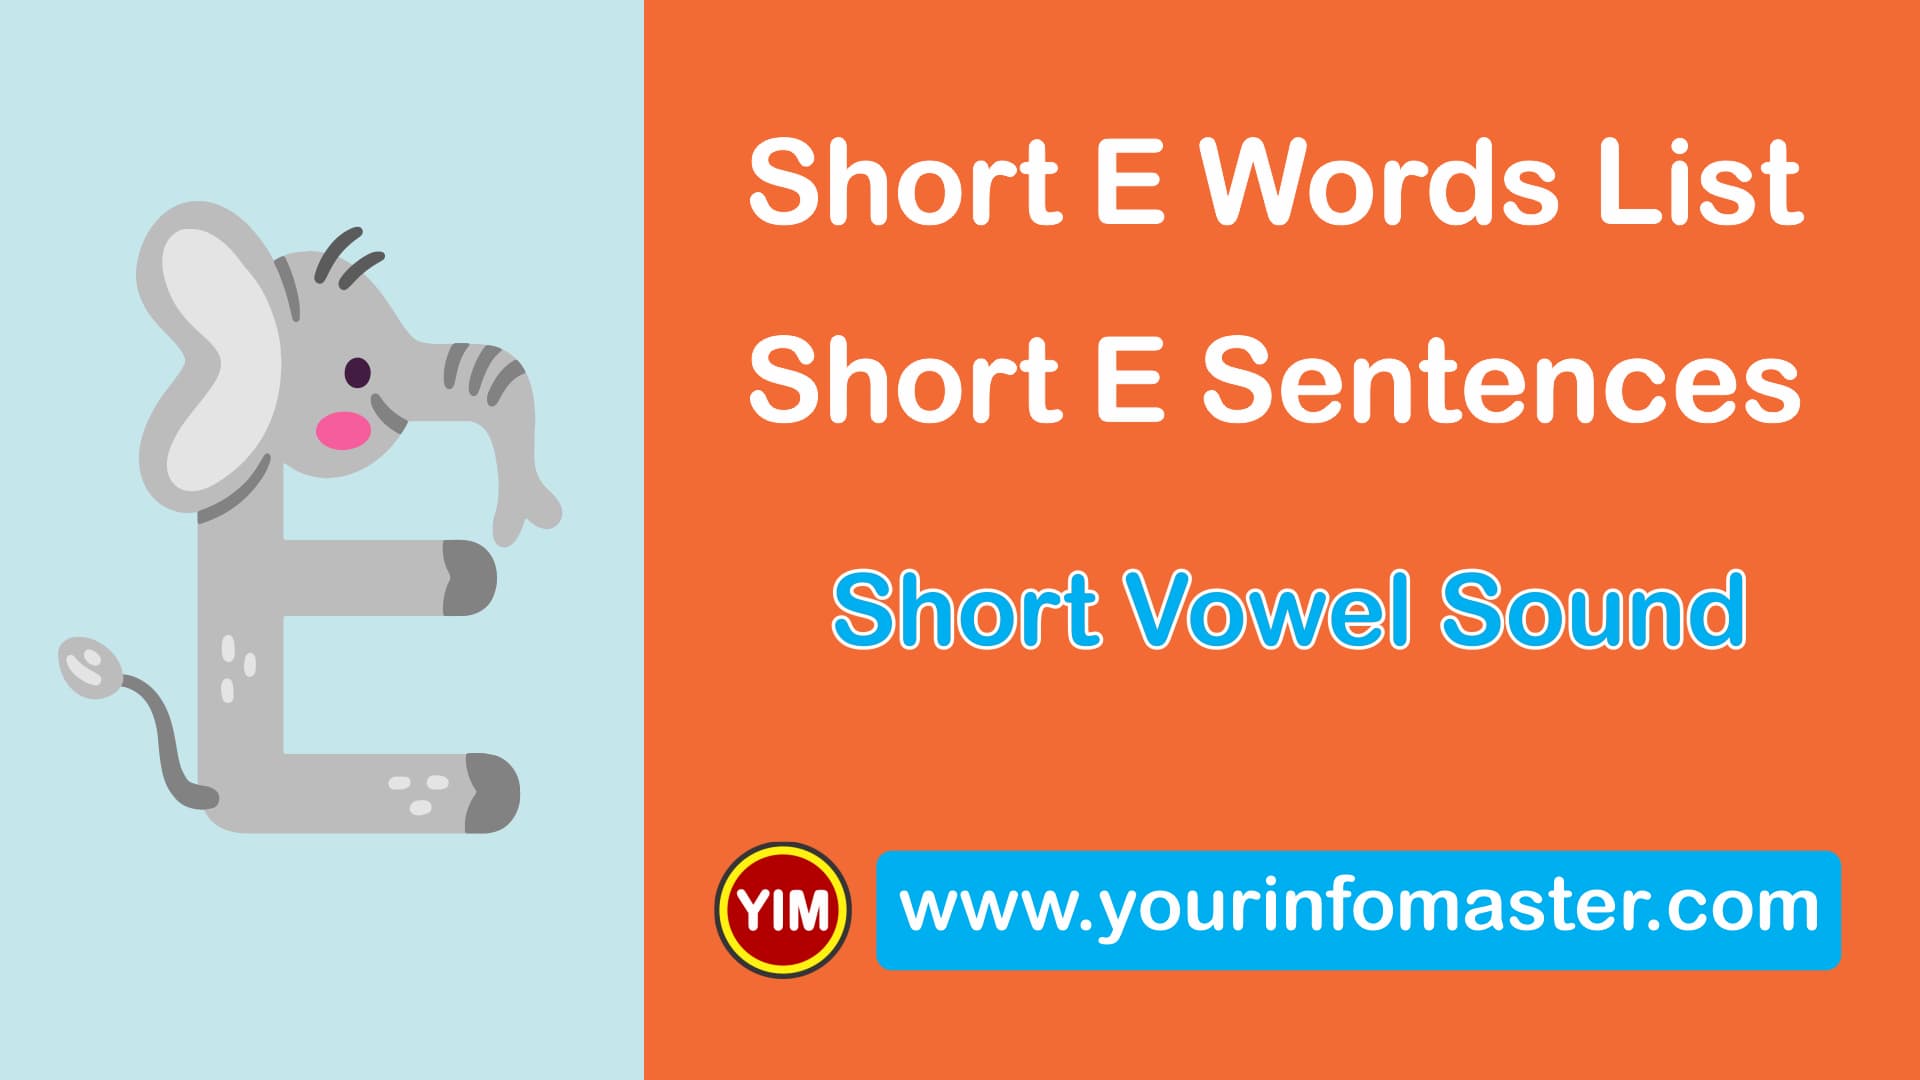 awesome words, cool short words, cool words, e words, Learning Spellings, Long versus Short Vowels, short E sound words, short E words, Short E Words List, Short E Words Worksheets, Short Vowel, Short Vowel Examples, Short Vowel Sound, Short Vowel Sounds Examples, Using Short Vowel Sounds, Vowel E Sound, Vowel Pronunciation, What is a Vowel, word of the day for kids